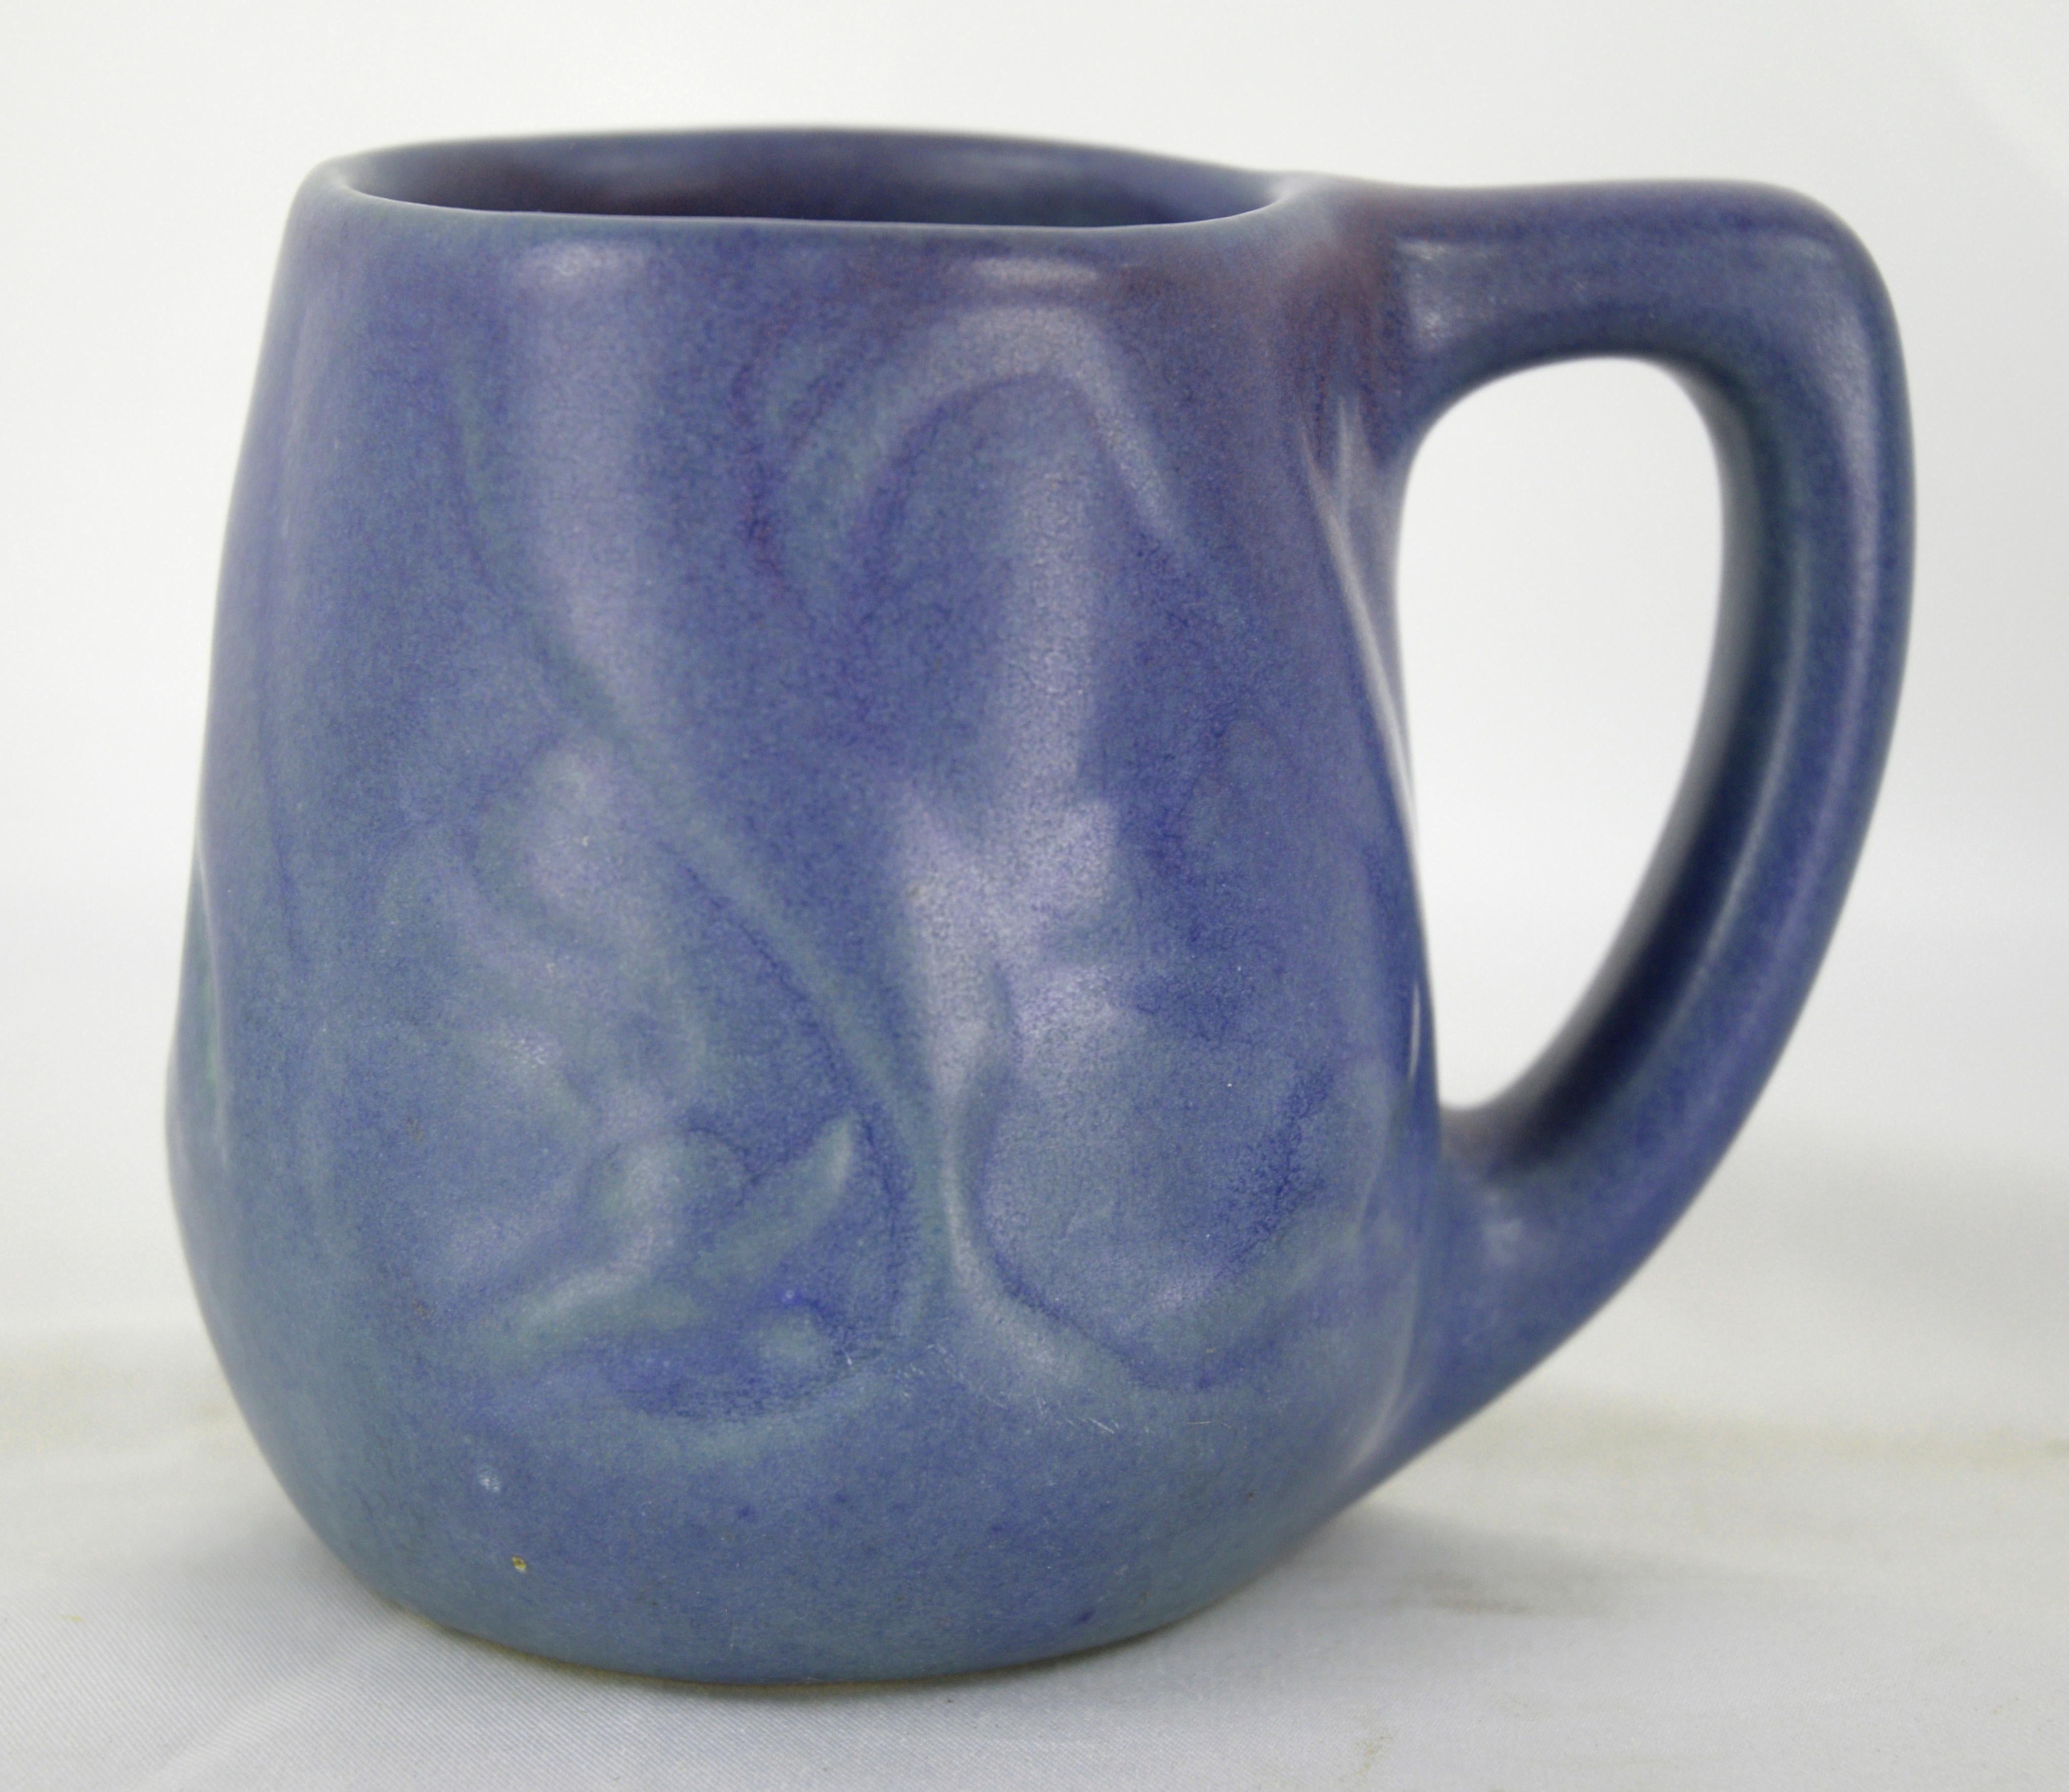 Elegant blue-purple mug by Van Briggle Pottery. This color is uncommon - most of these pieces were made in a turquoise color. Finished by Clara Beyers (1989-1997). Glazed by either Annette Moody or Garoid (Gary) Dhondt.

Maker's logo, name, and